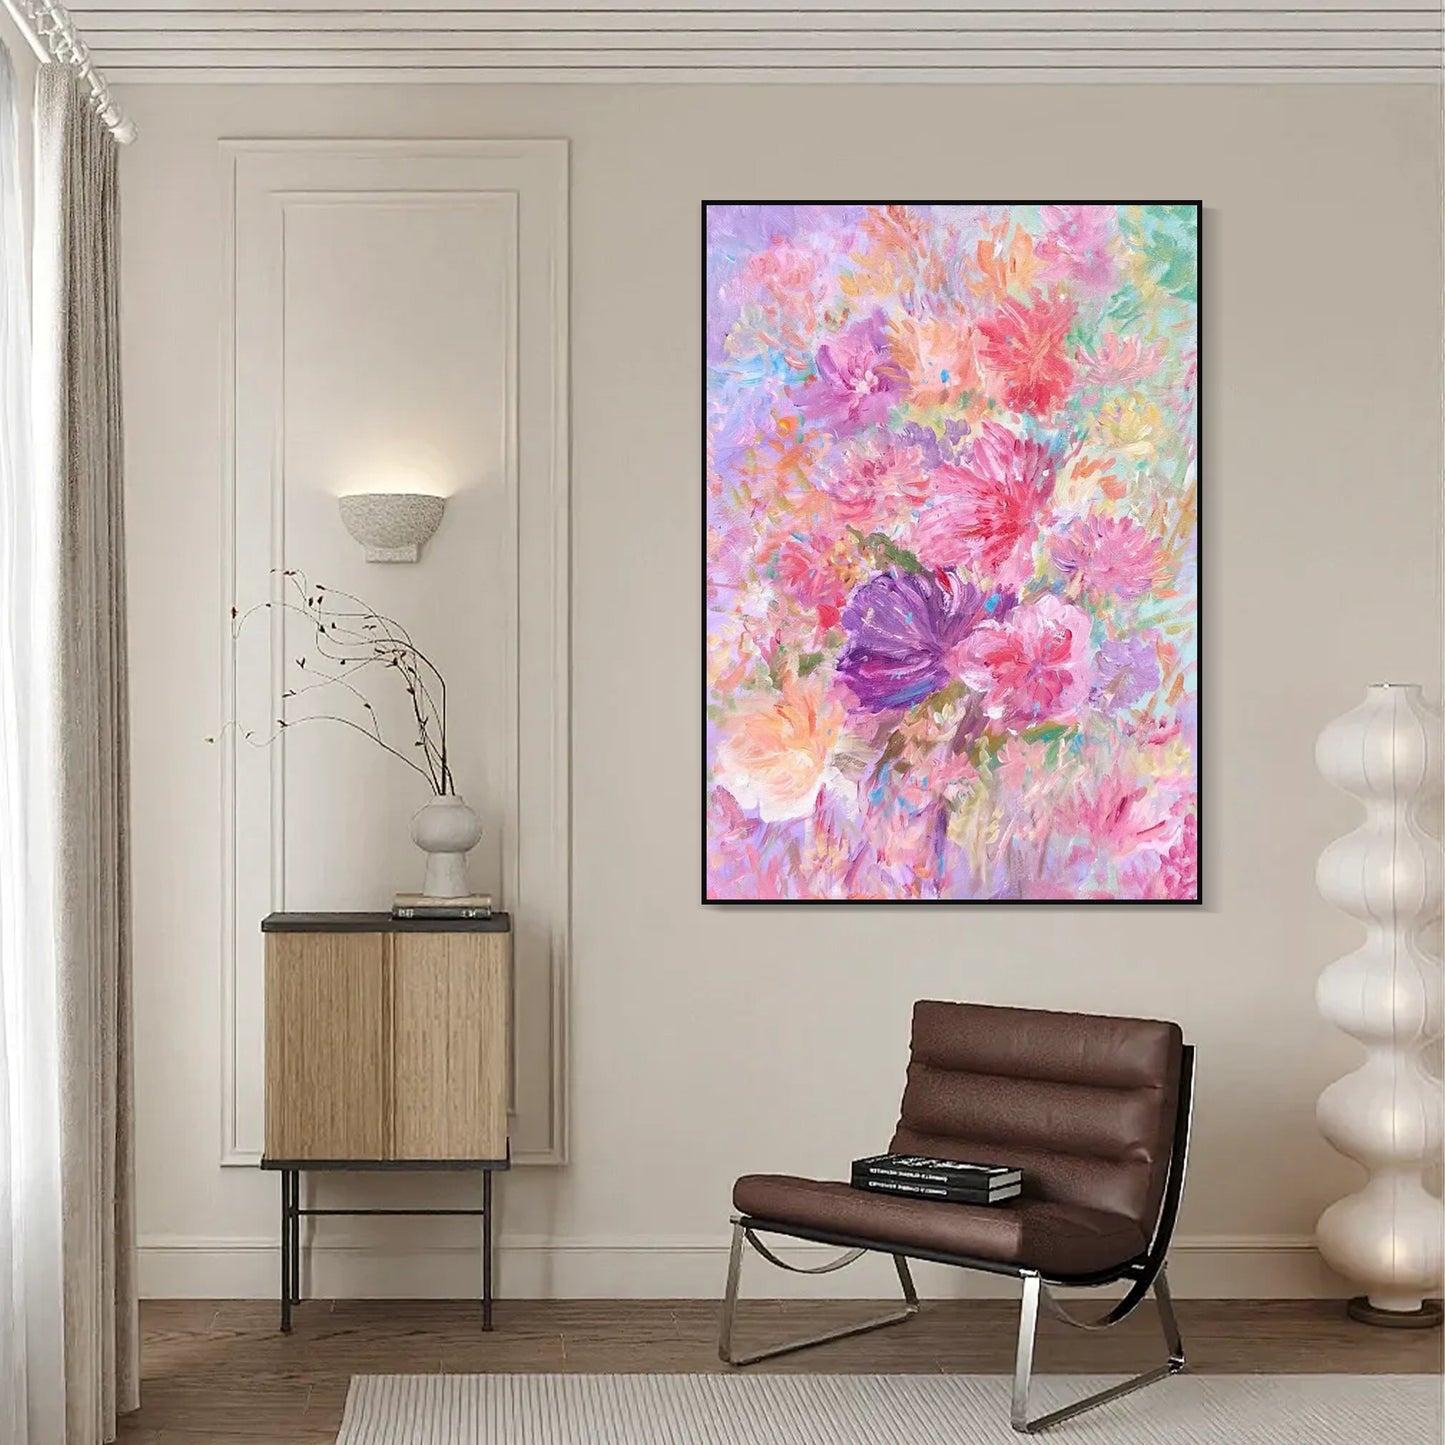 FLOWER PAINTING, PINK BLOOM 2, HAND-PAINTED CANVAS